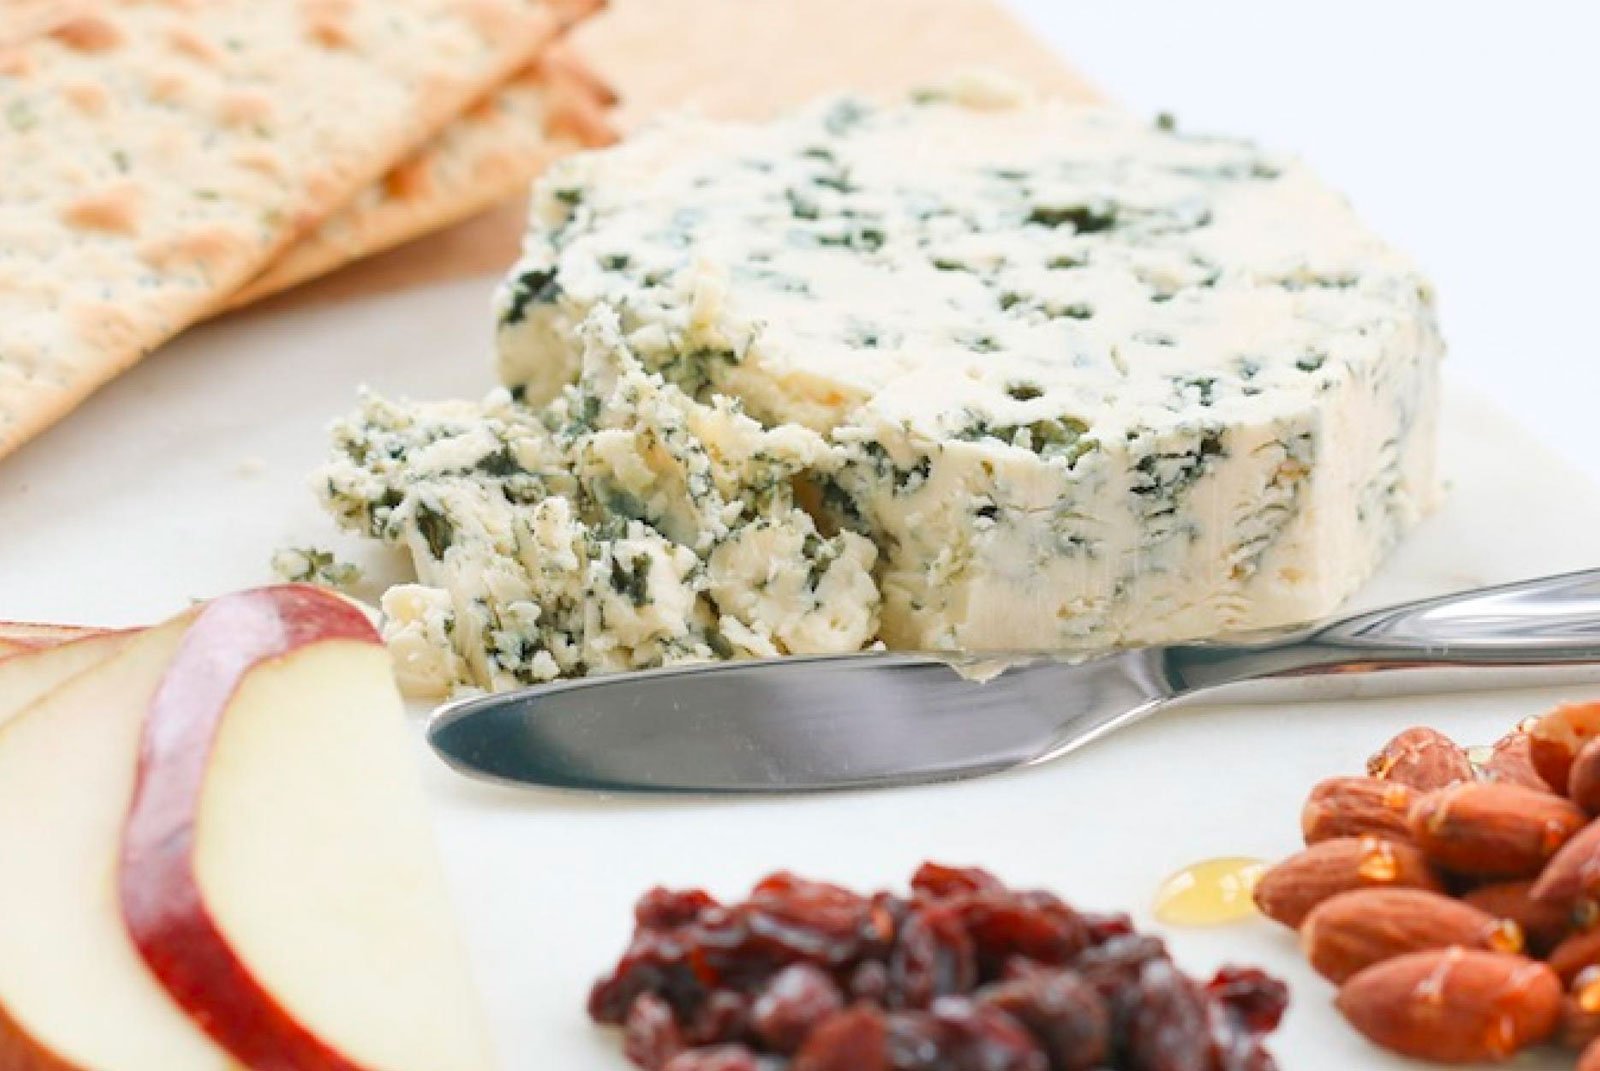 Settle These Food Debates and We’ll Guess Which Three Foods You Love the Most bluecheese